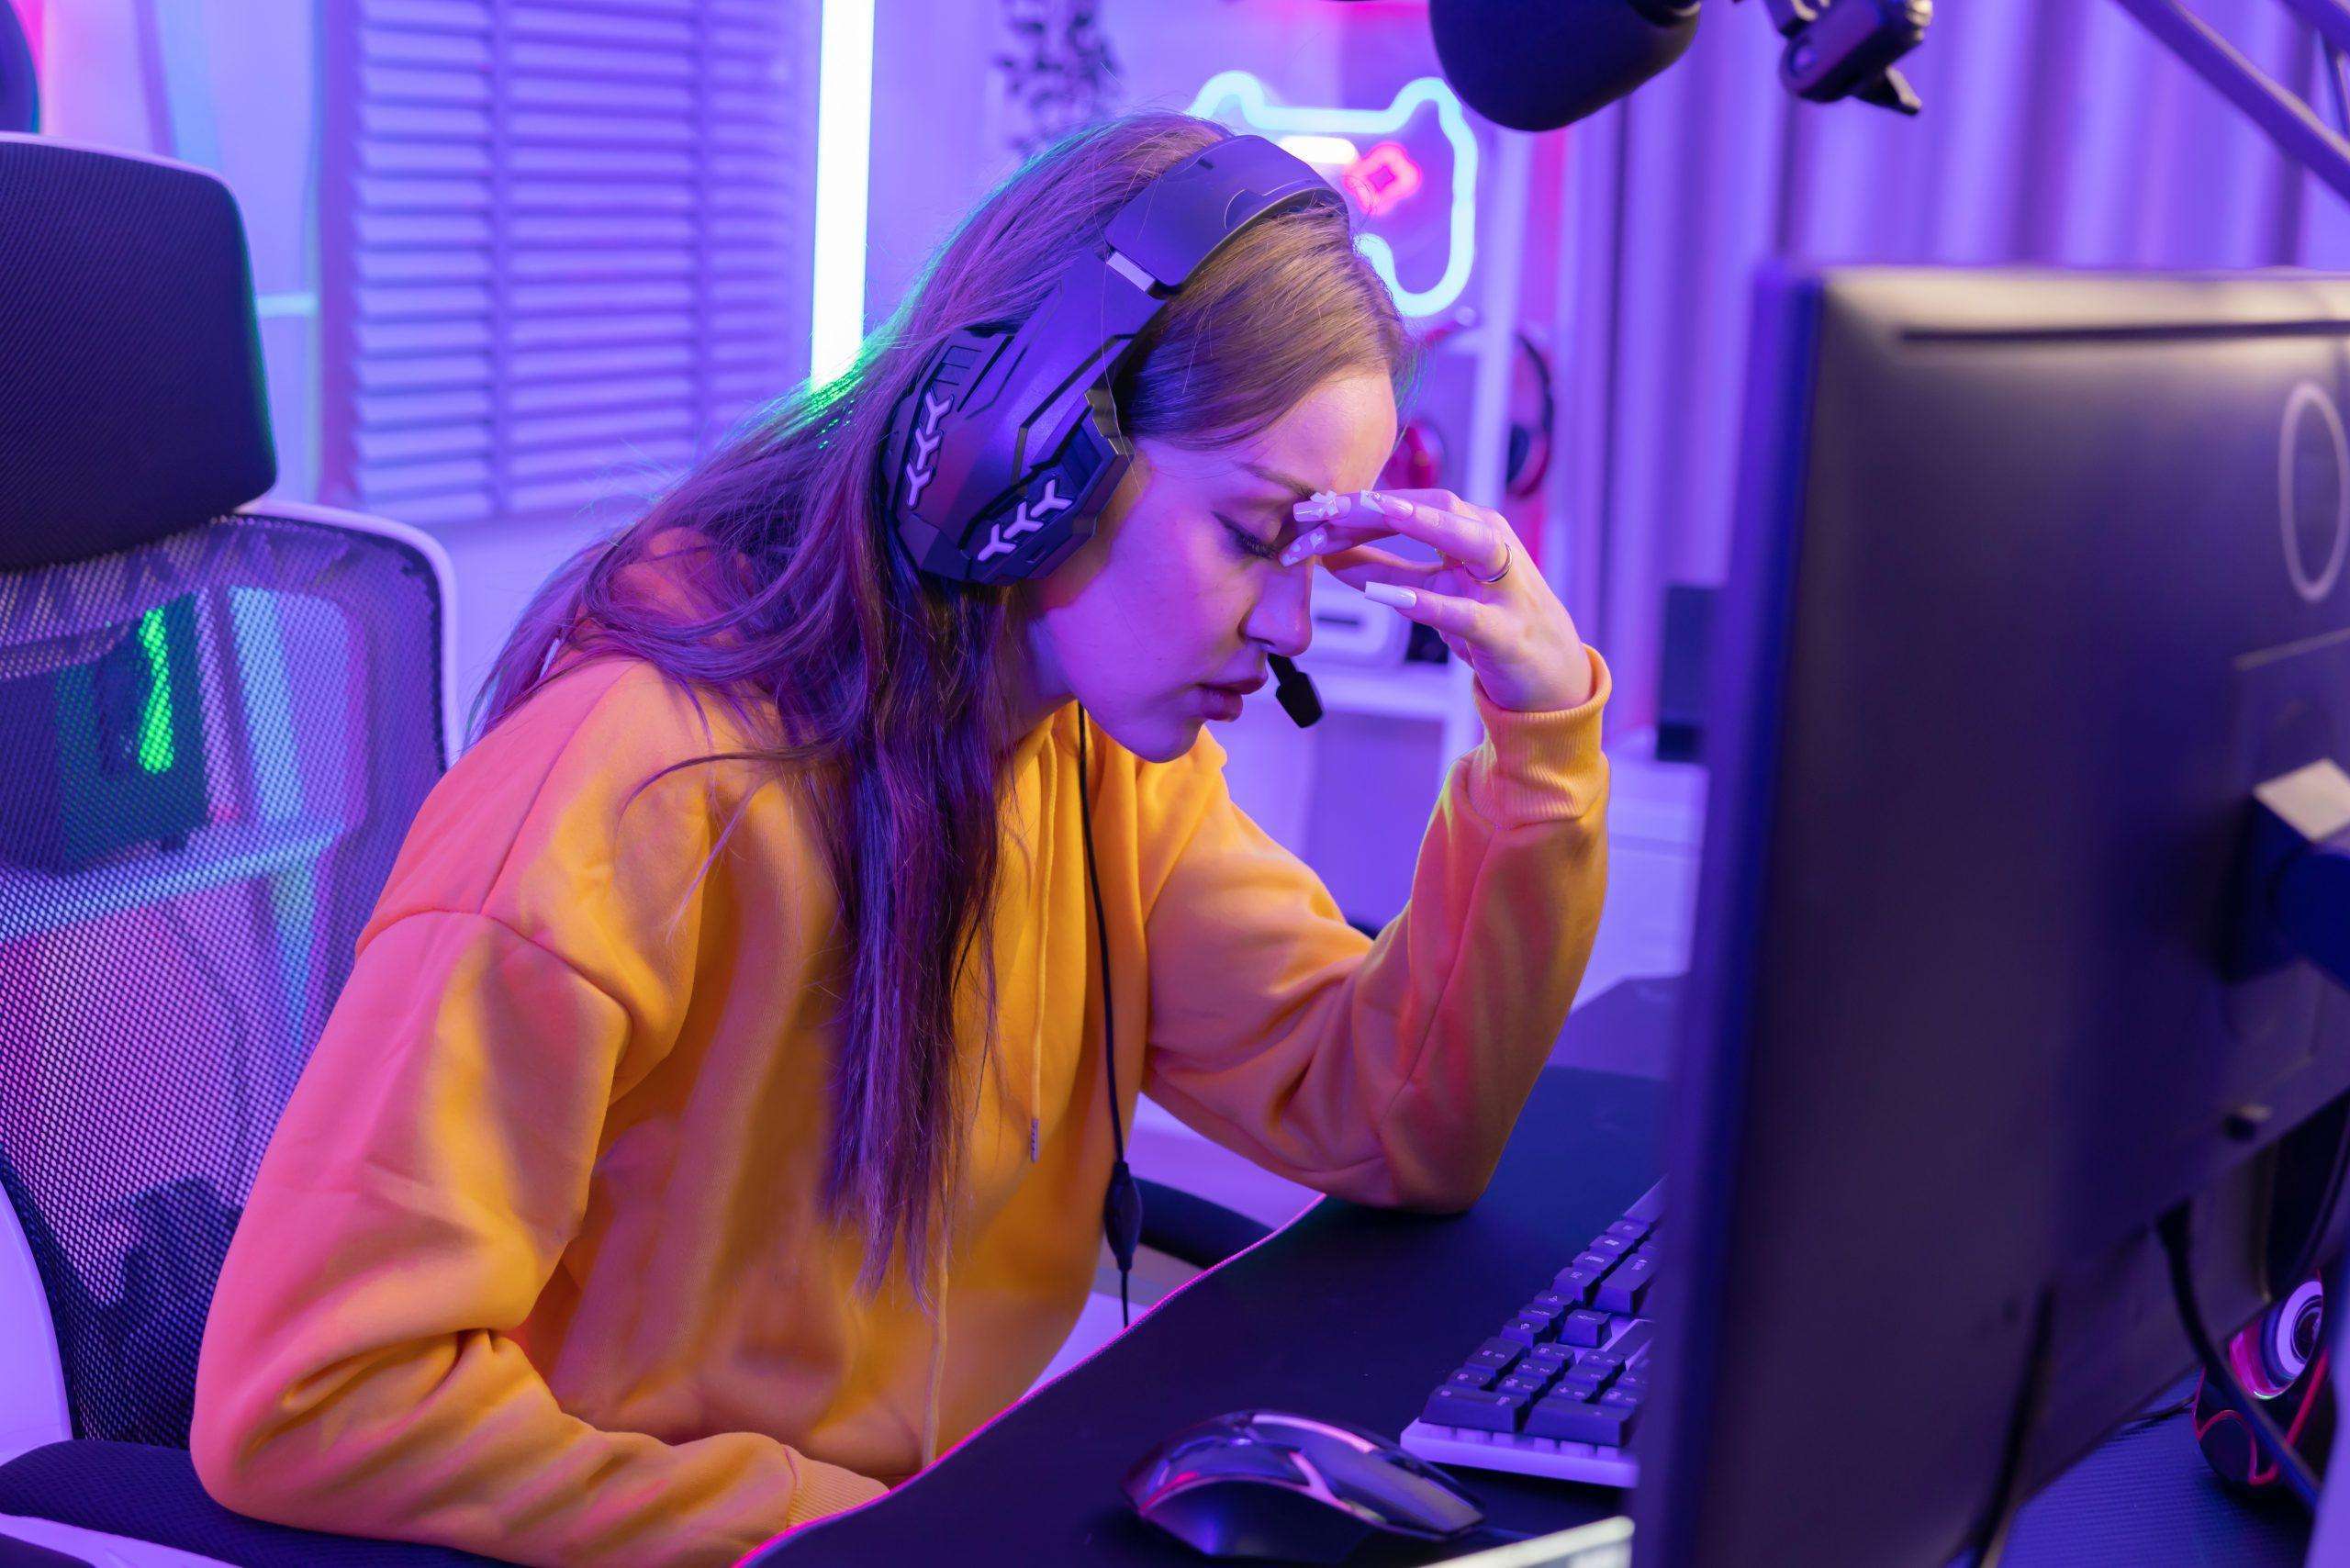 Female Gamer Suffered From Headache After Played Game For a Long Time